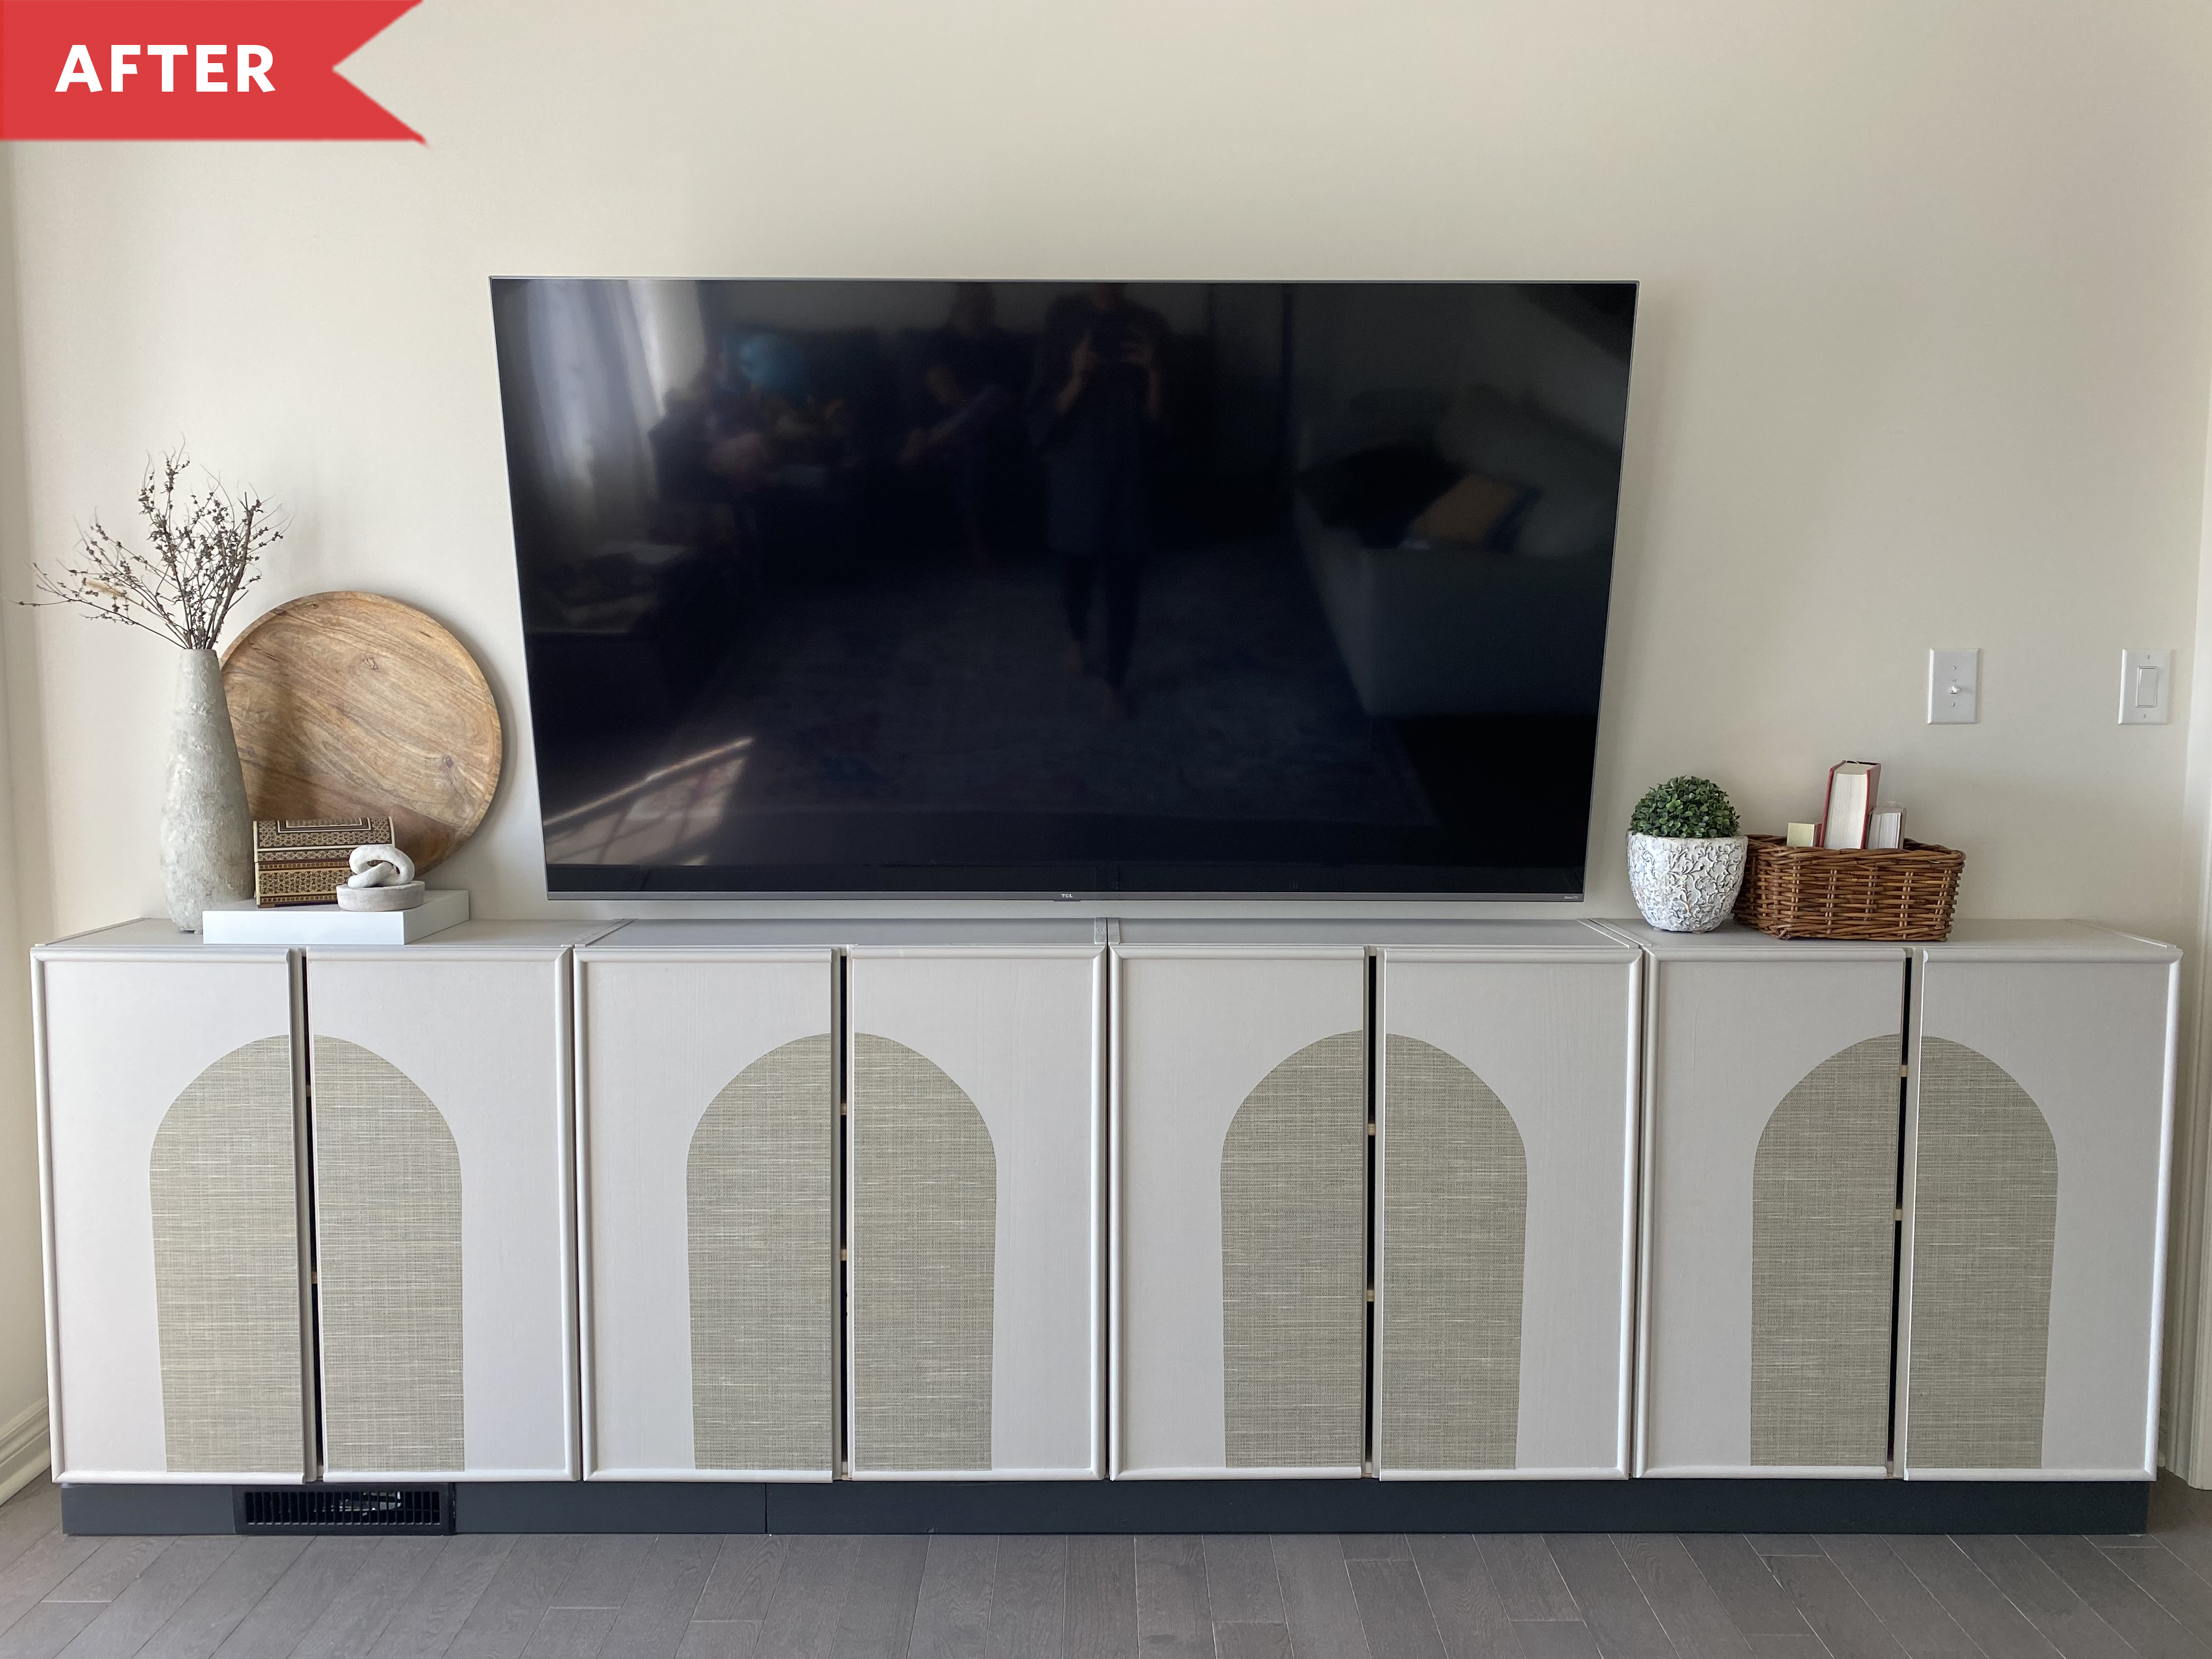 Abby on Instagram: “IKEA HACK! 2 Eket cabinets + pole wrap = the console  cabinet of my dreams!!! The console cabinet I really…